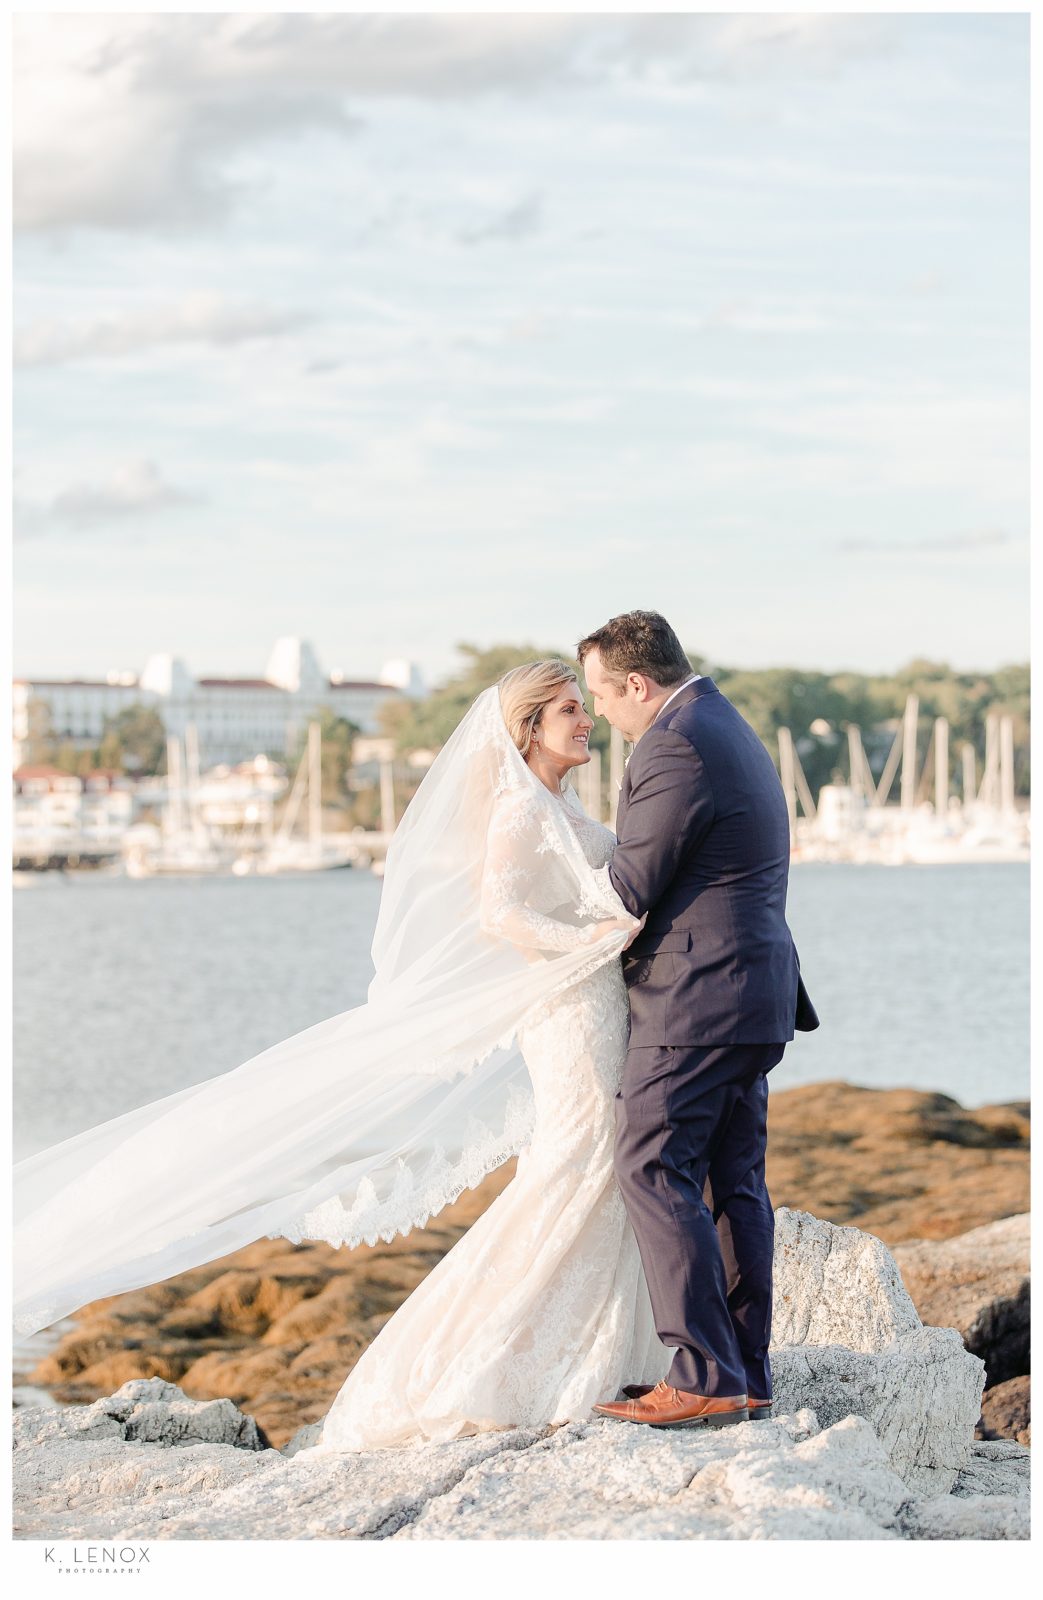 Monique + Zach's | Wedding at the Wentworth Country Club